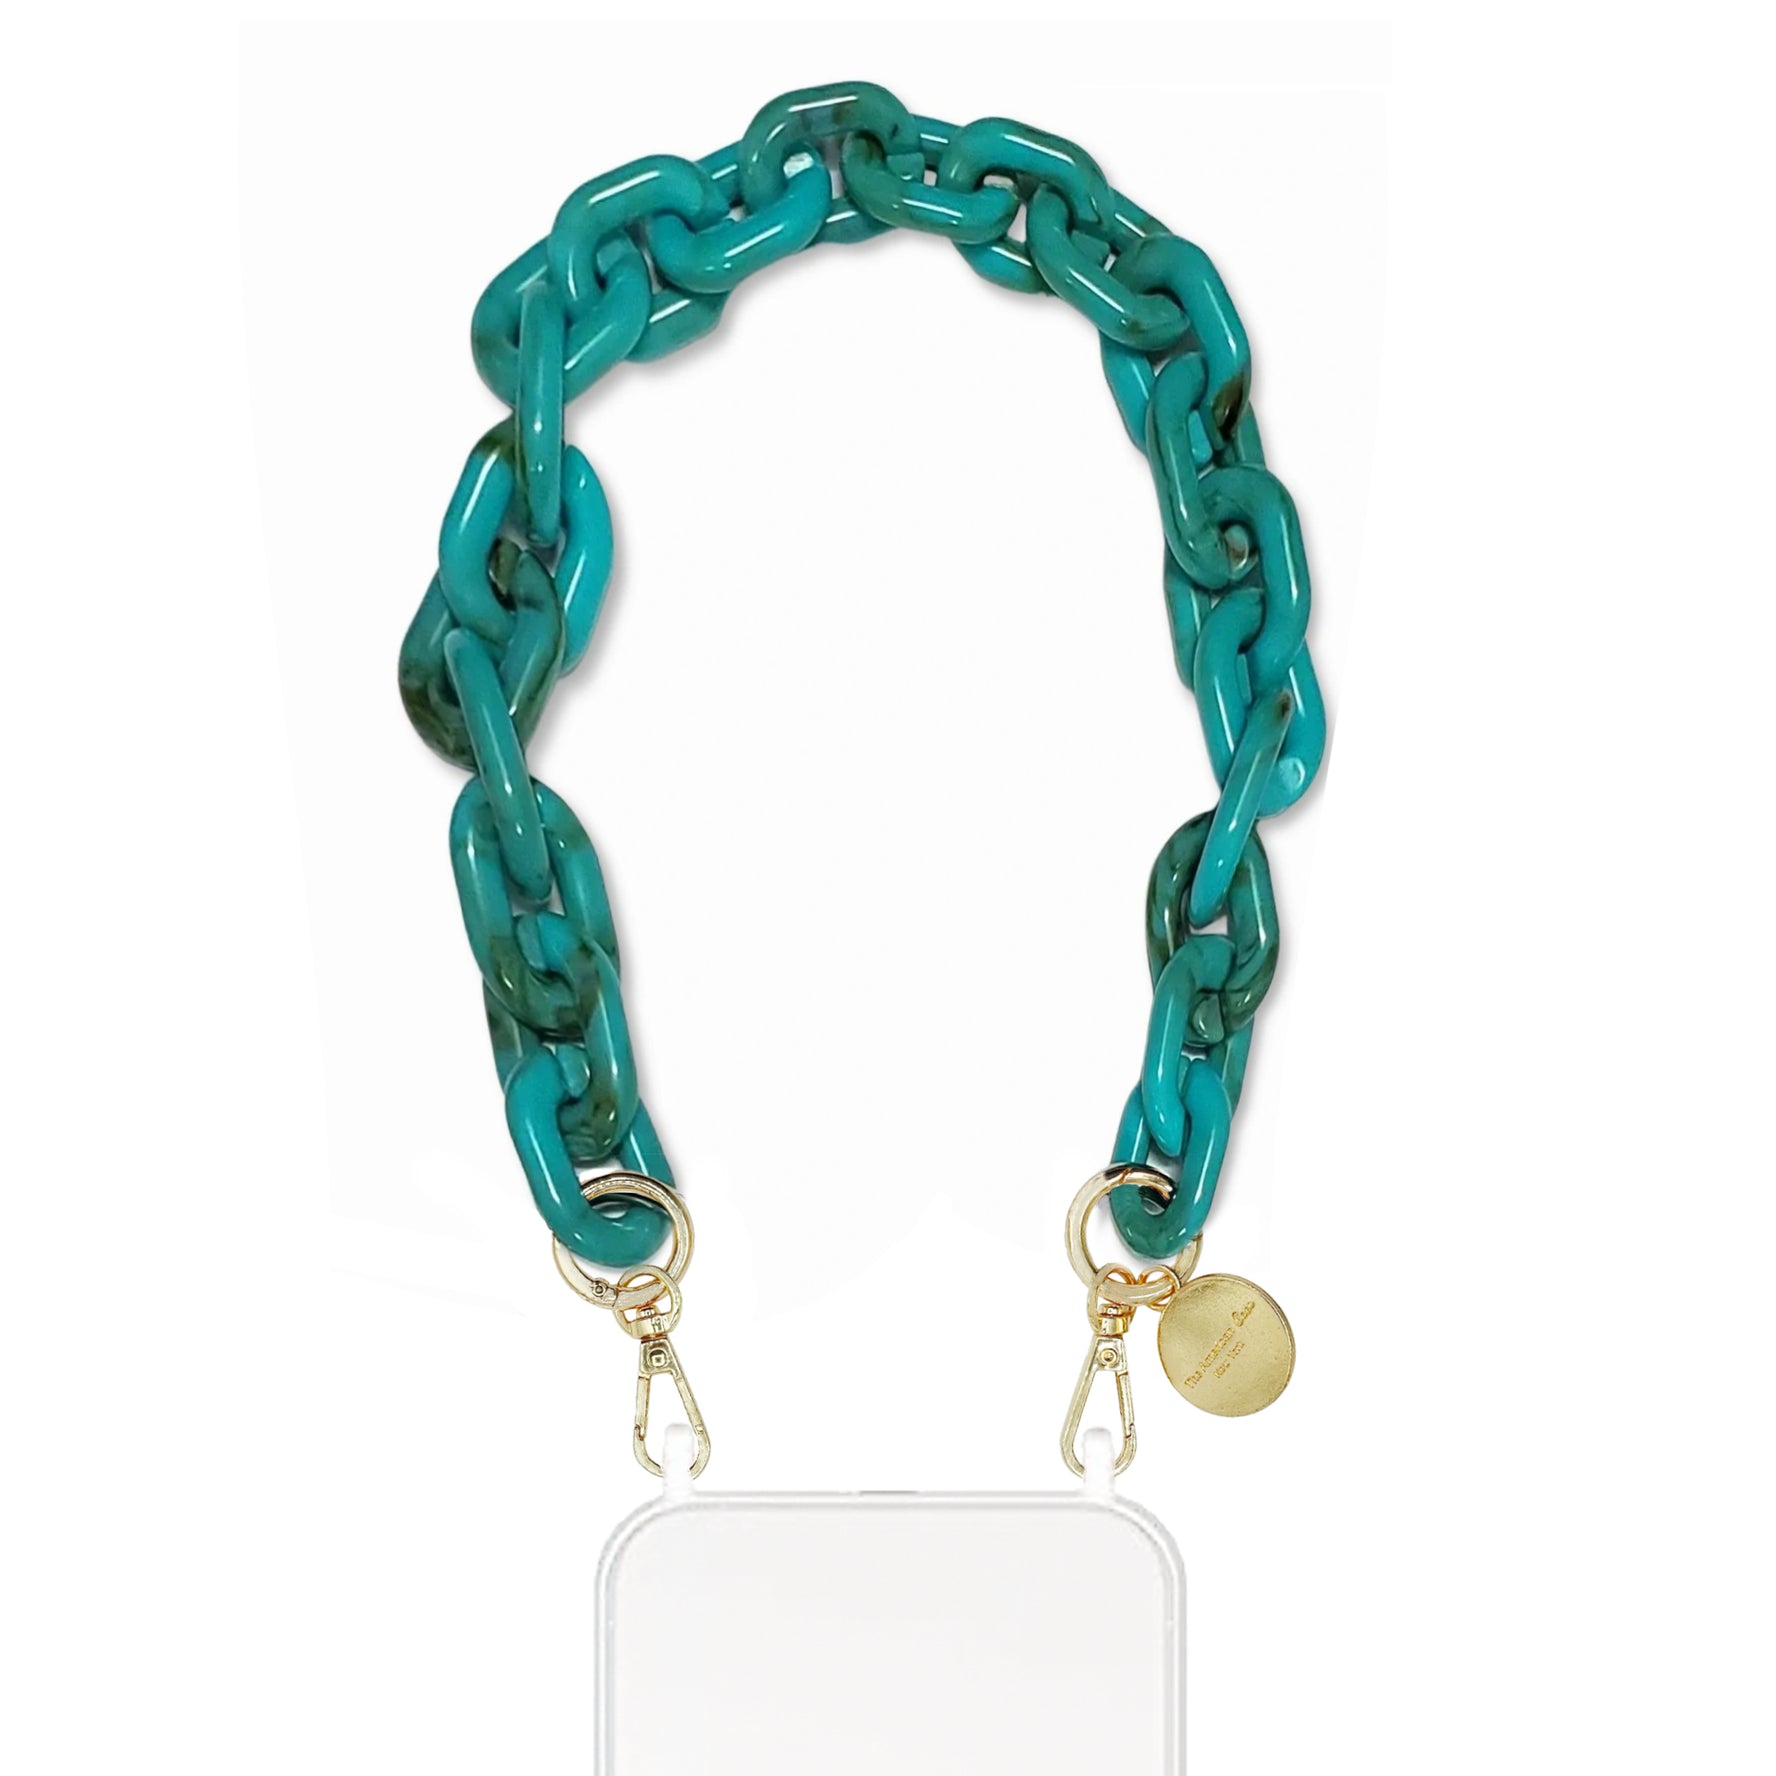 Cyan - Turquoise Short Resin Phone Chain with Gold Carabiners